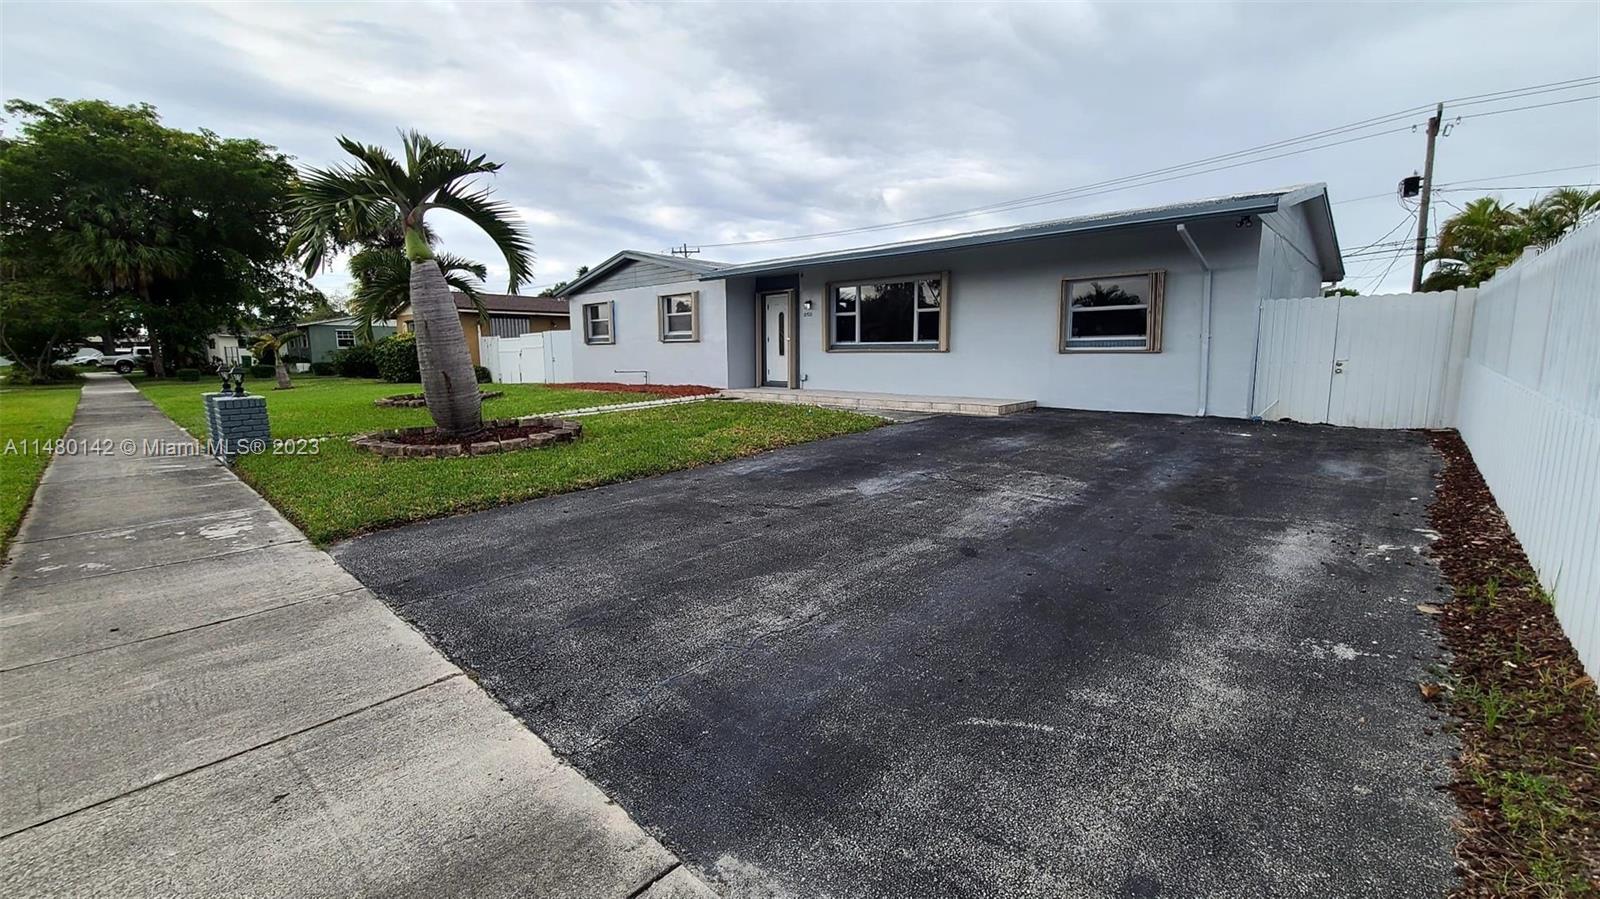 Photo 2 of   in Miami - MLS A11480142